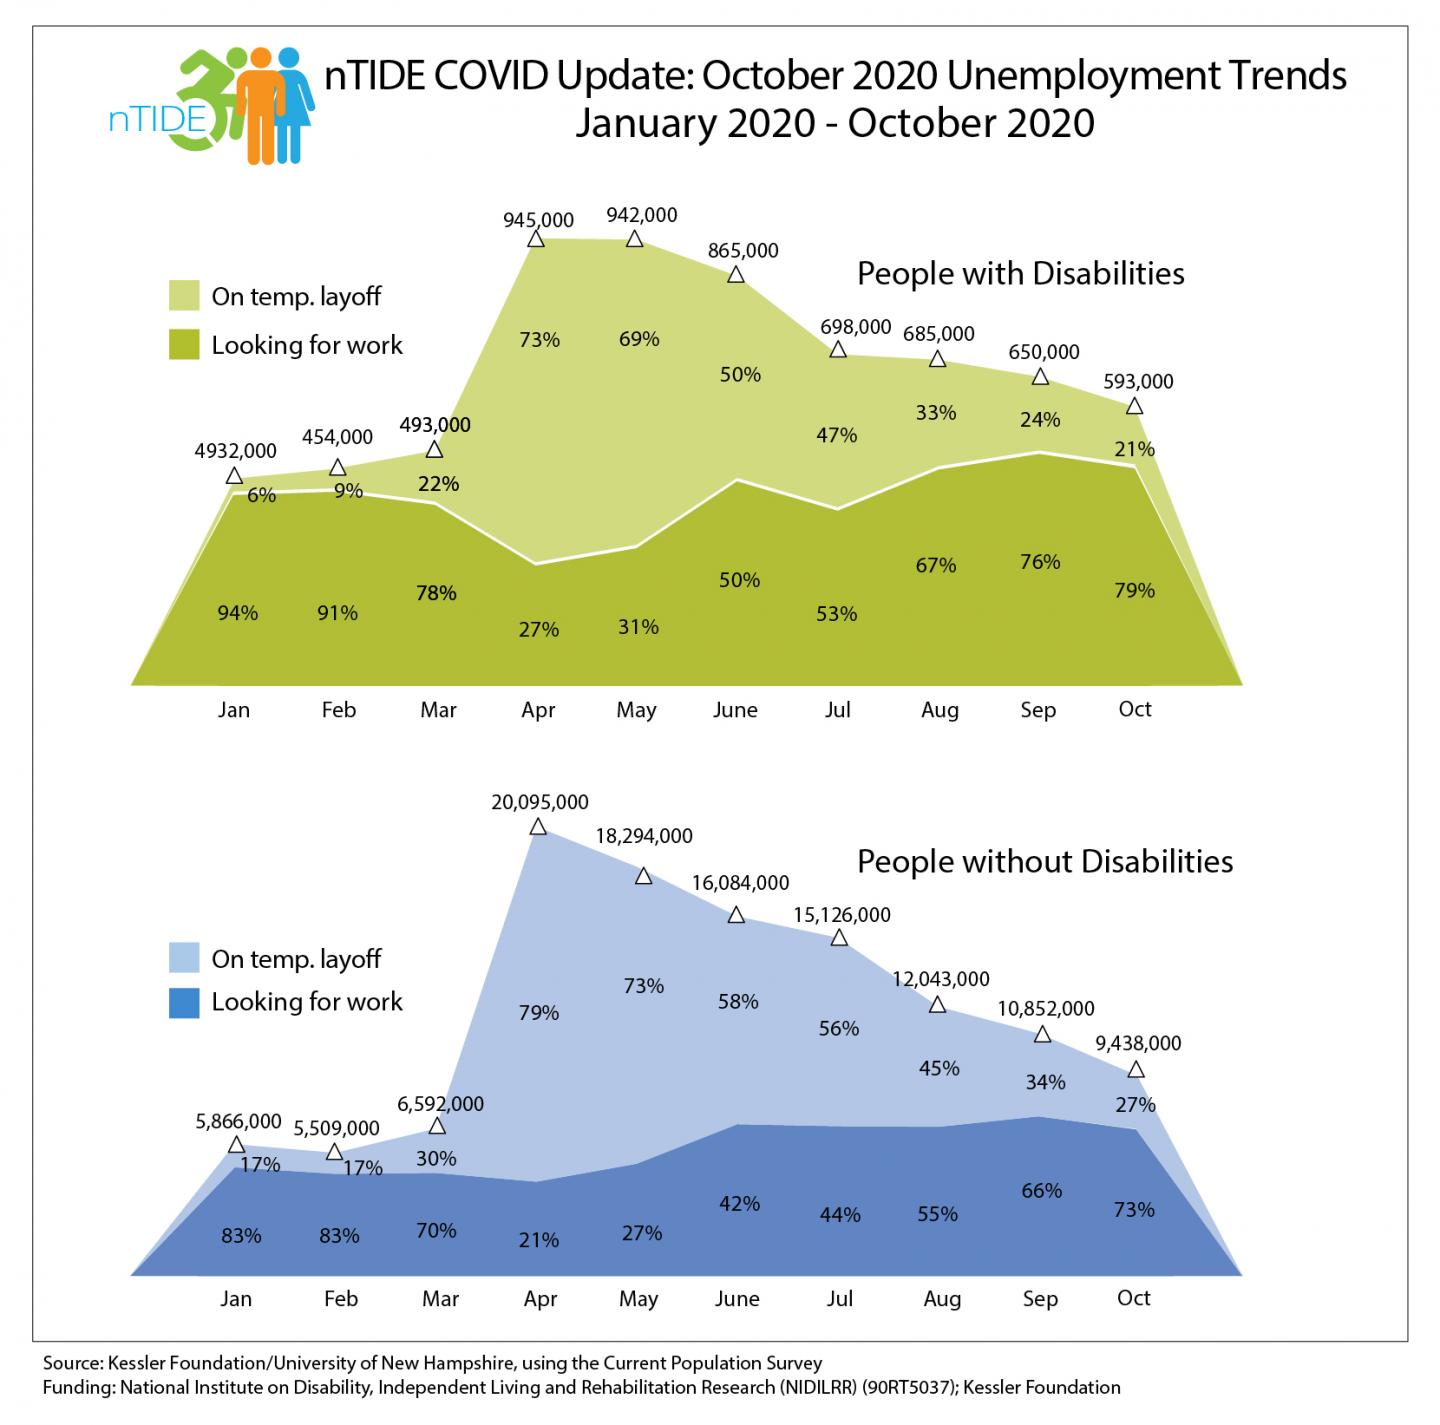 2020 Unemployment Data for People with and Without Disabilities (January to October)